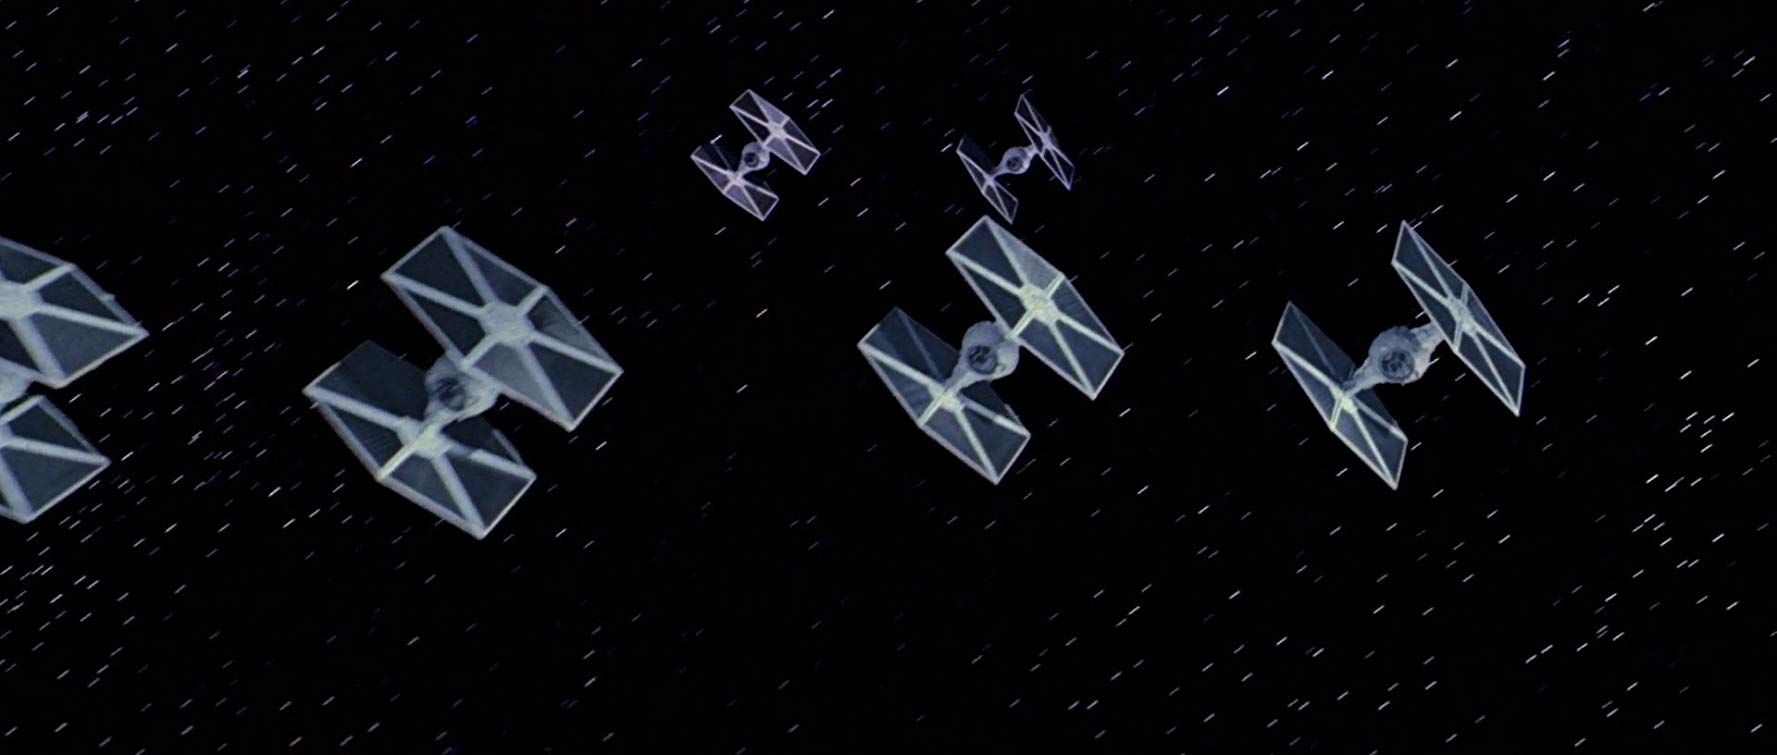 TIE Fighters A New Hope